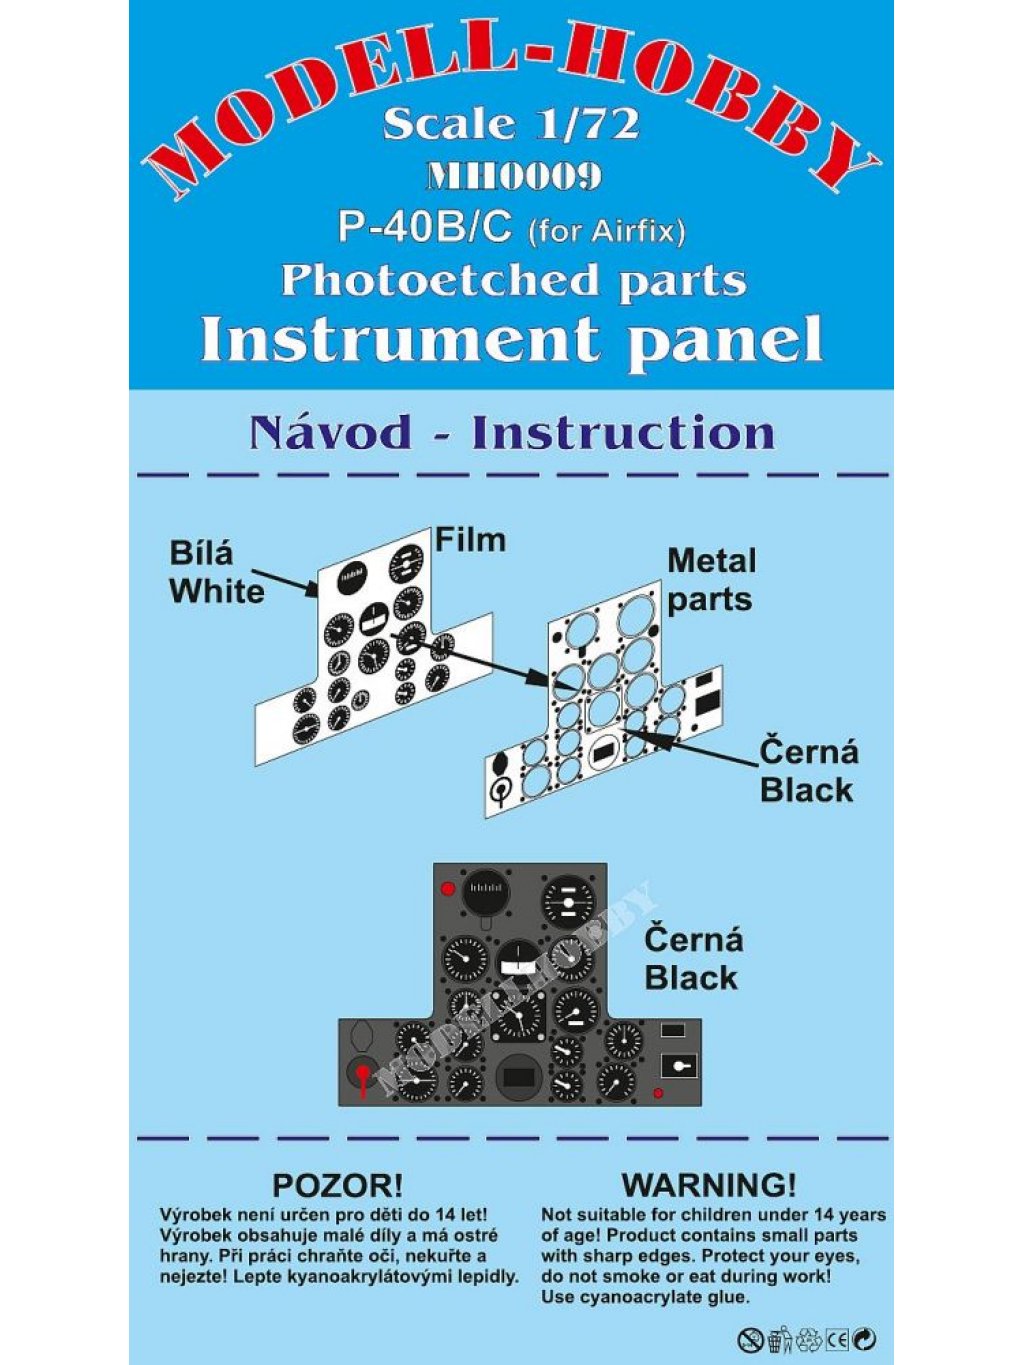 P-40B/C Tomahawk Photoetched parts instrument panel for Airfix ex Modell-Hobby